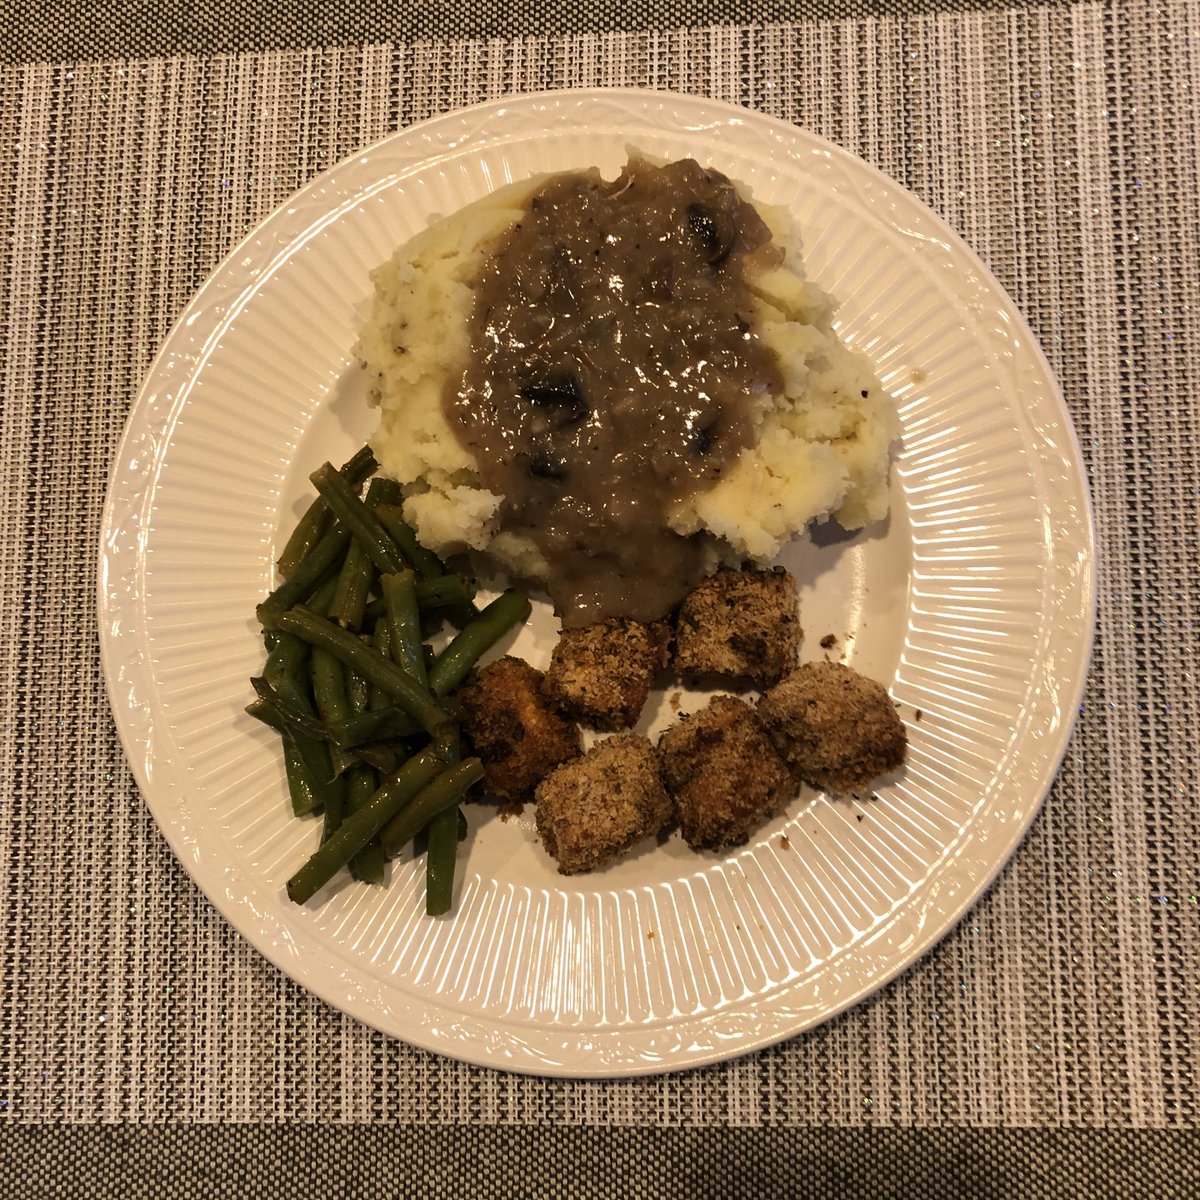 Baked breaded tofu, green beans, and mashed potatoes with mushroom gravy.